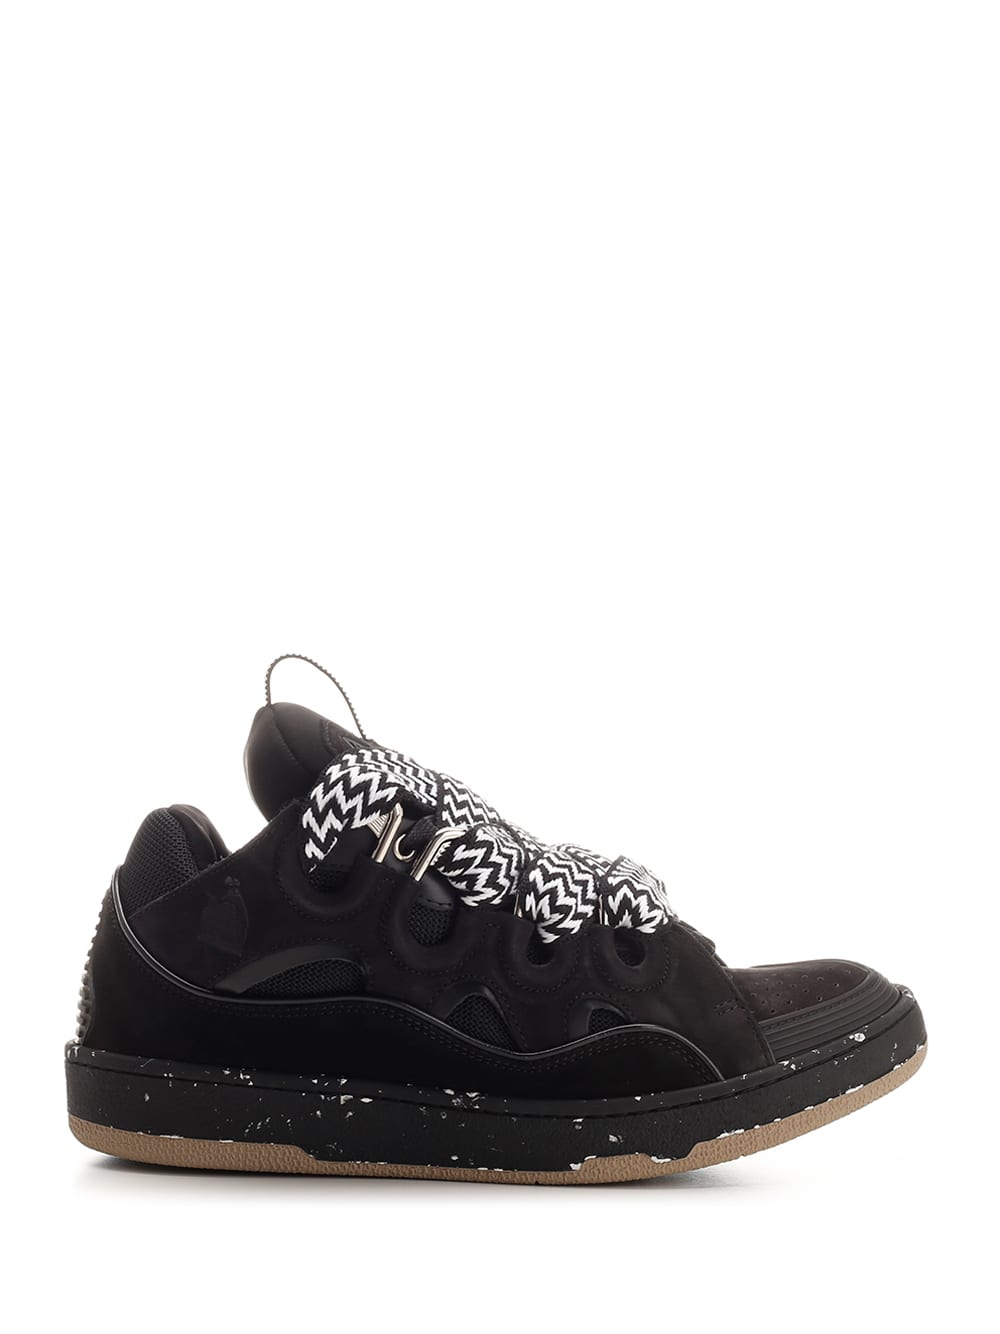 LANVIN CURB SNEAKERS IN BLACK LEATHER